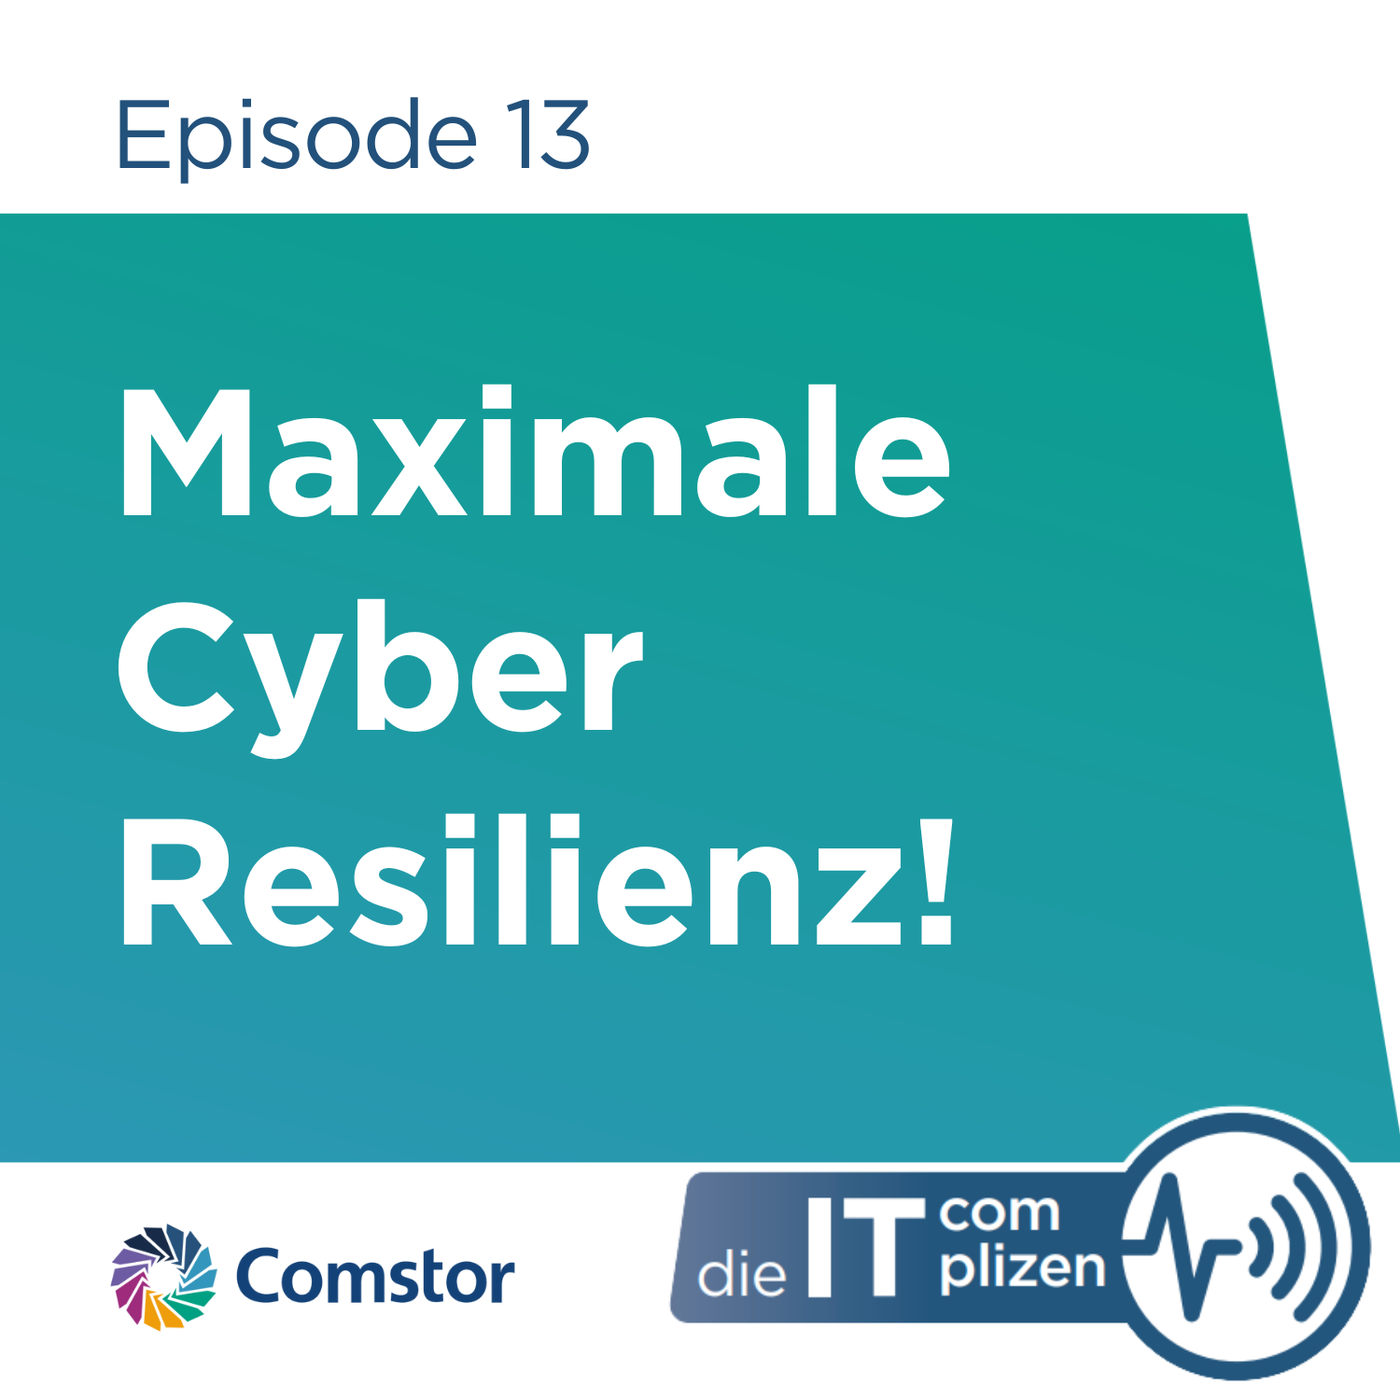 Maximale Cyber Resilienz